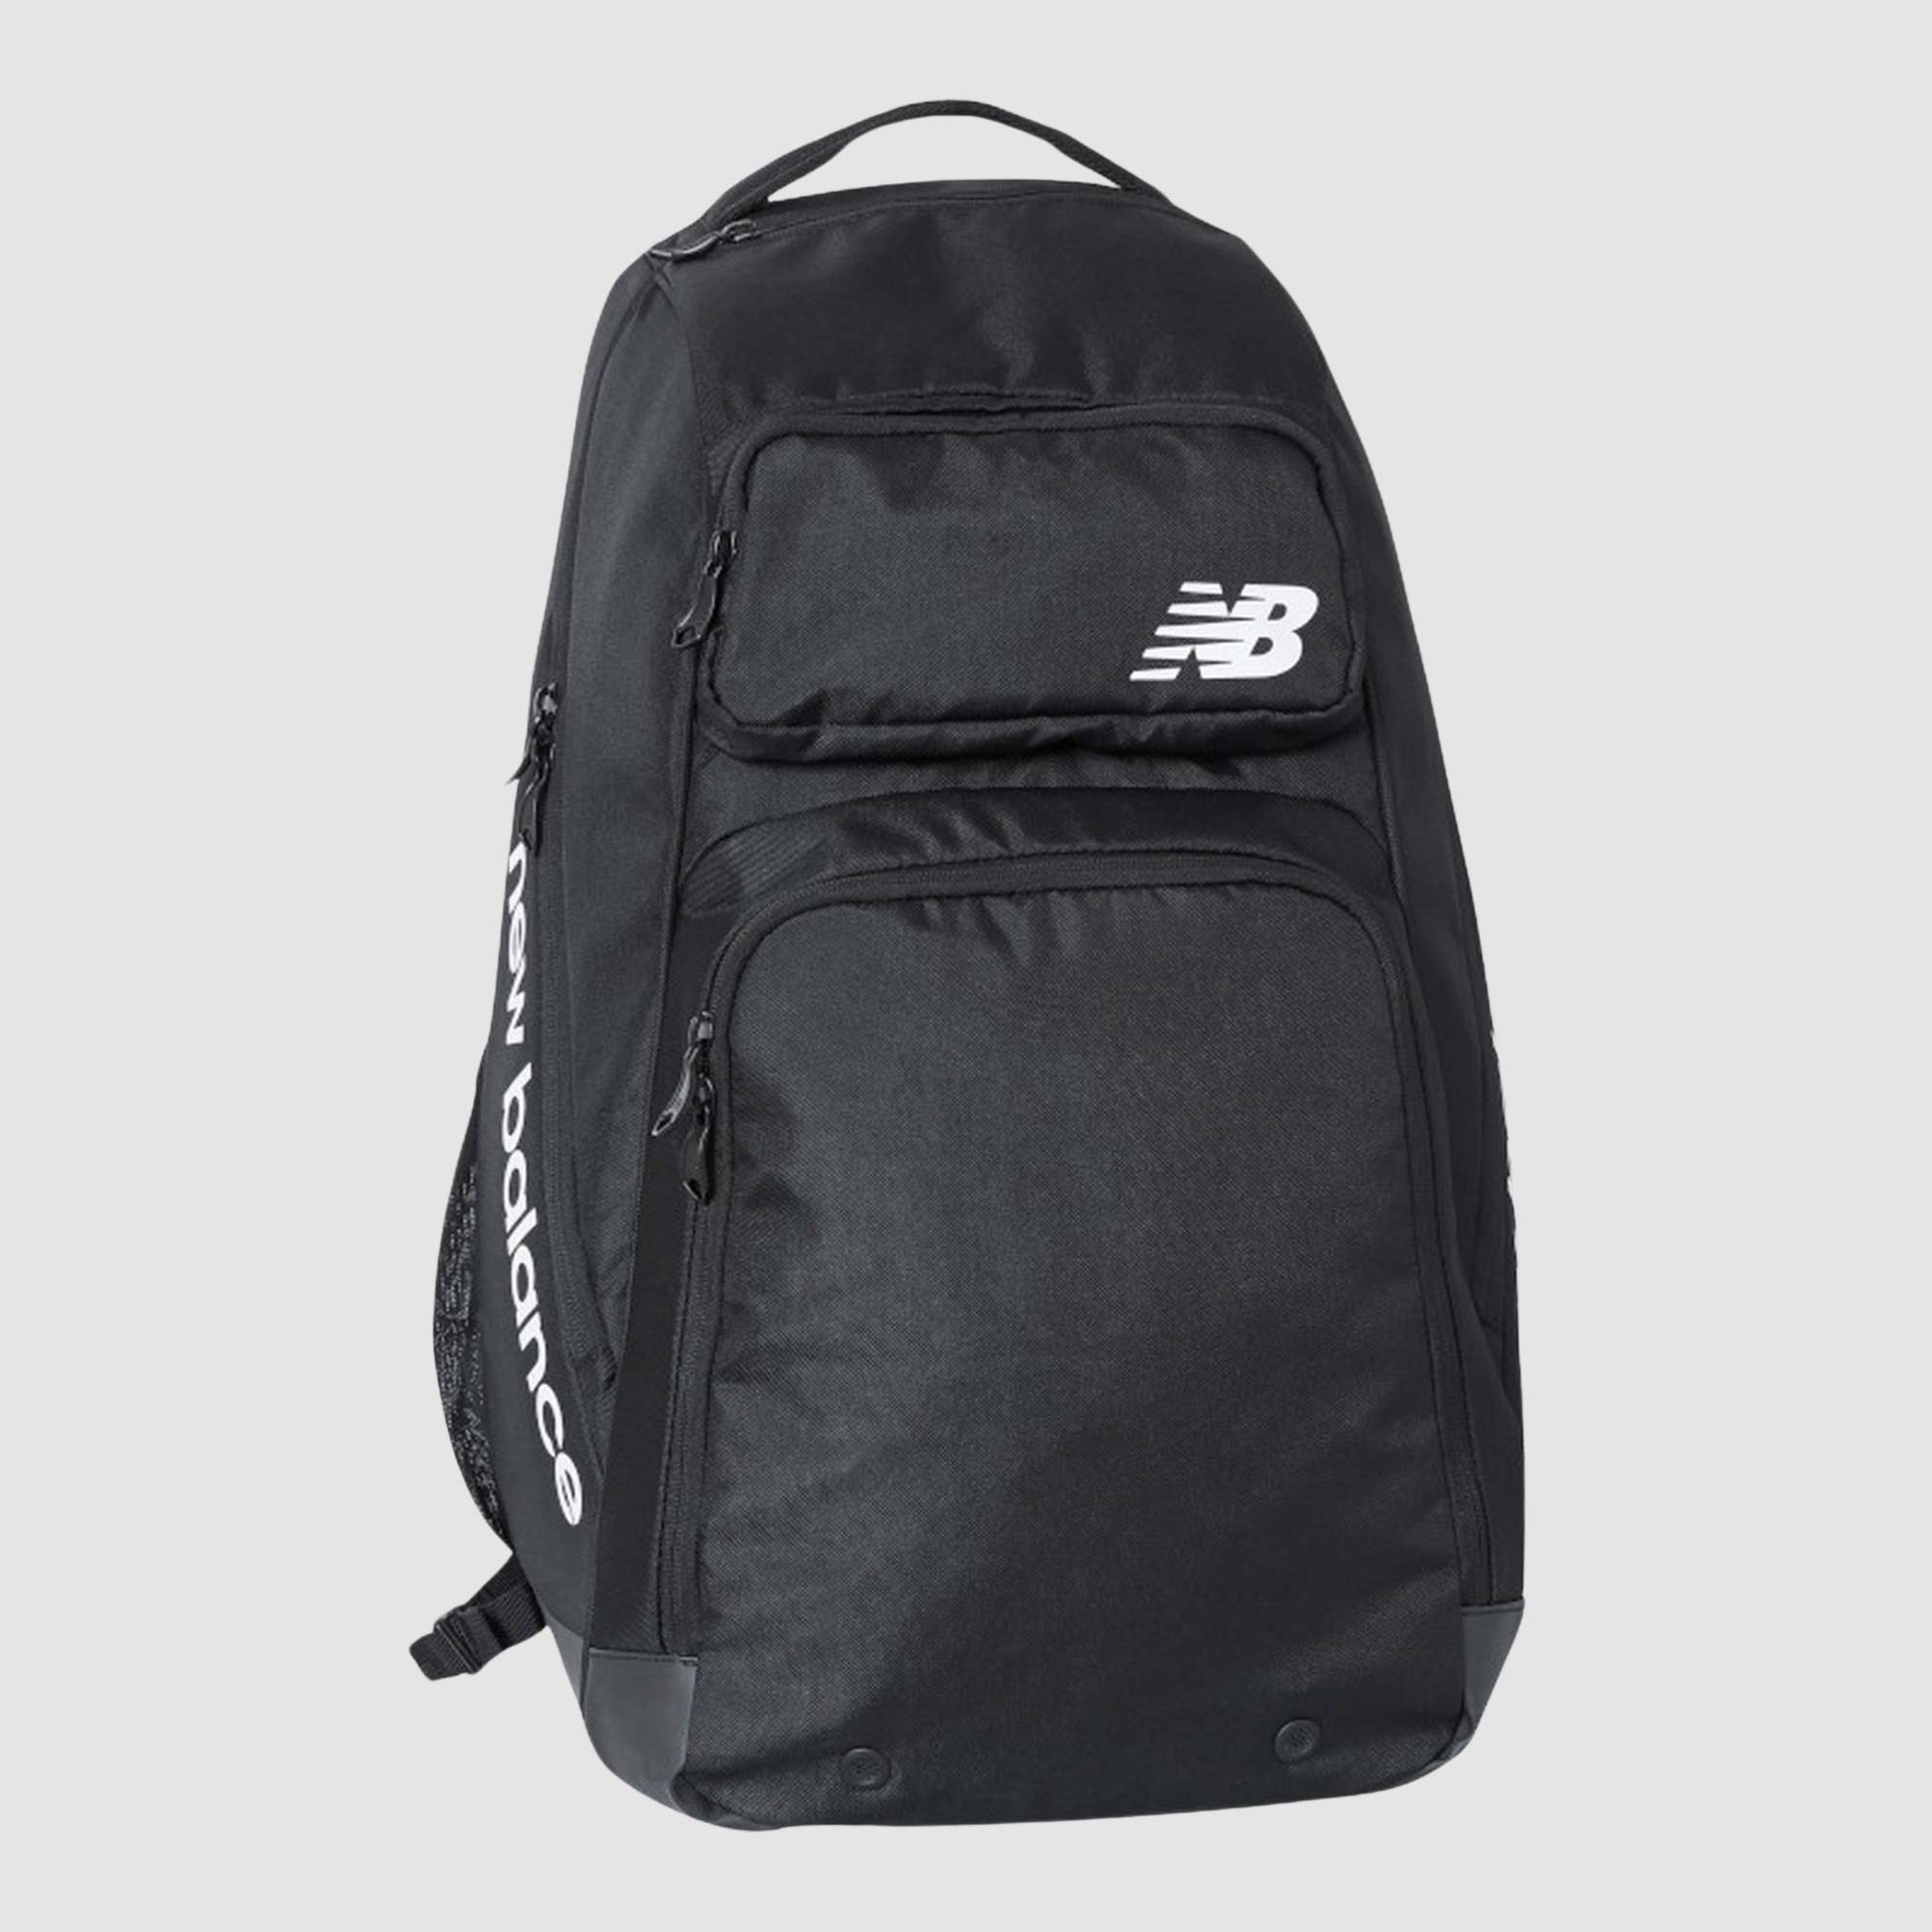 New Balance Team Field Backpack Black 47 Litres